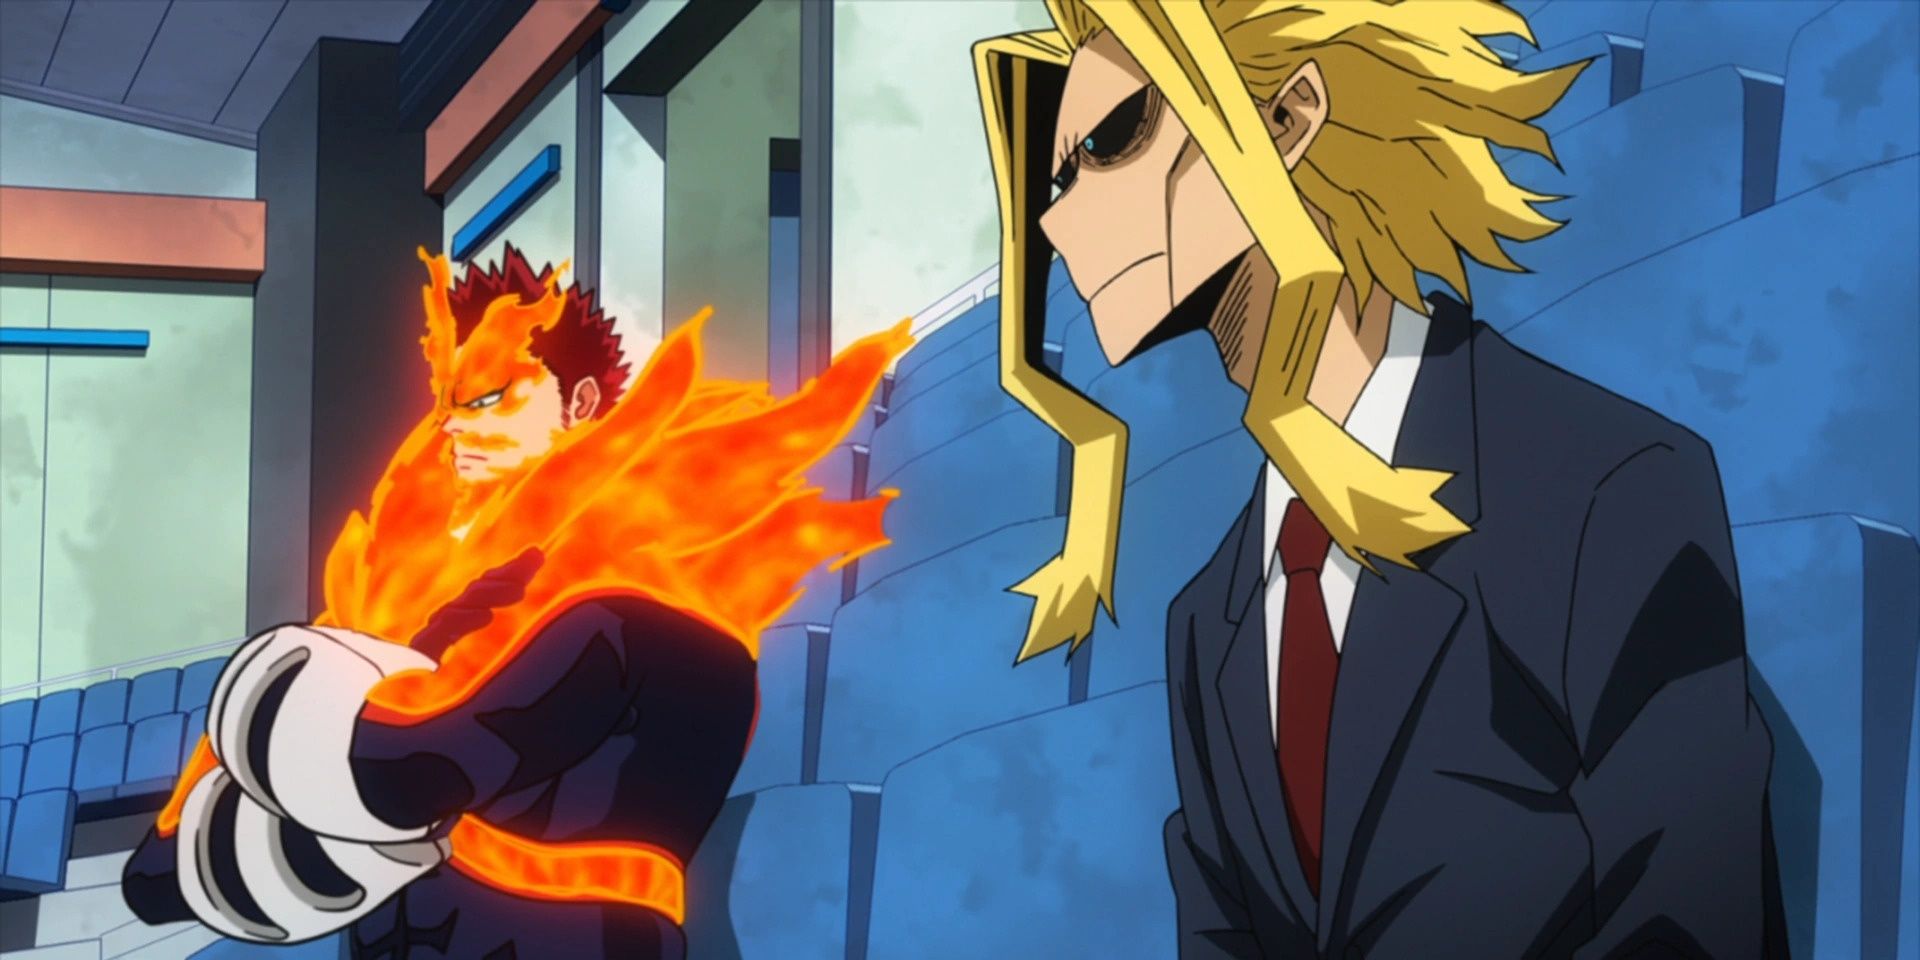 All Might and Endeavor (My Hero Academia)